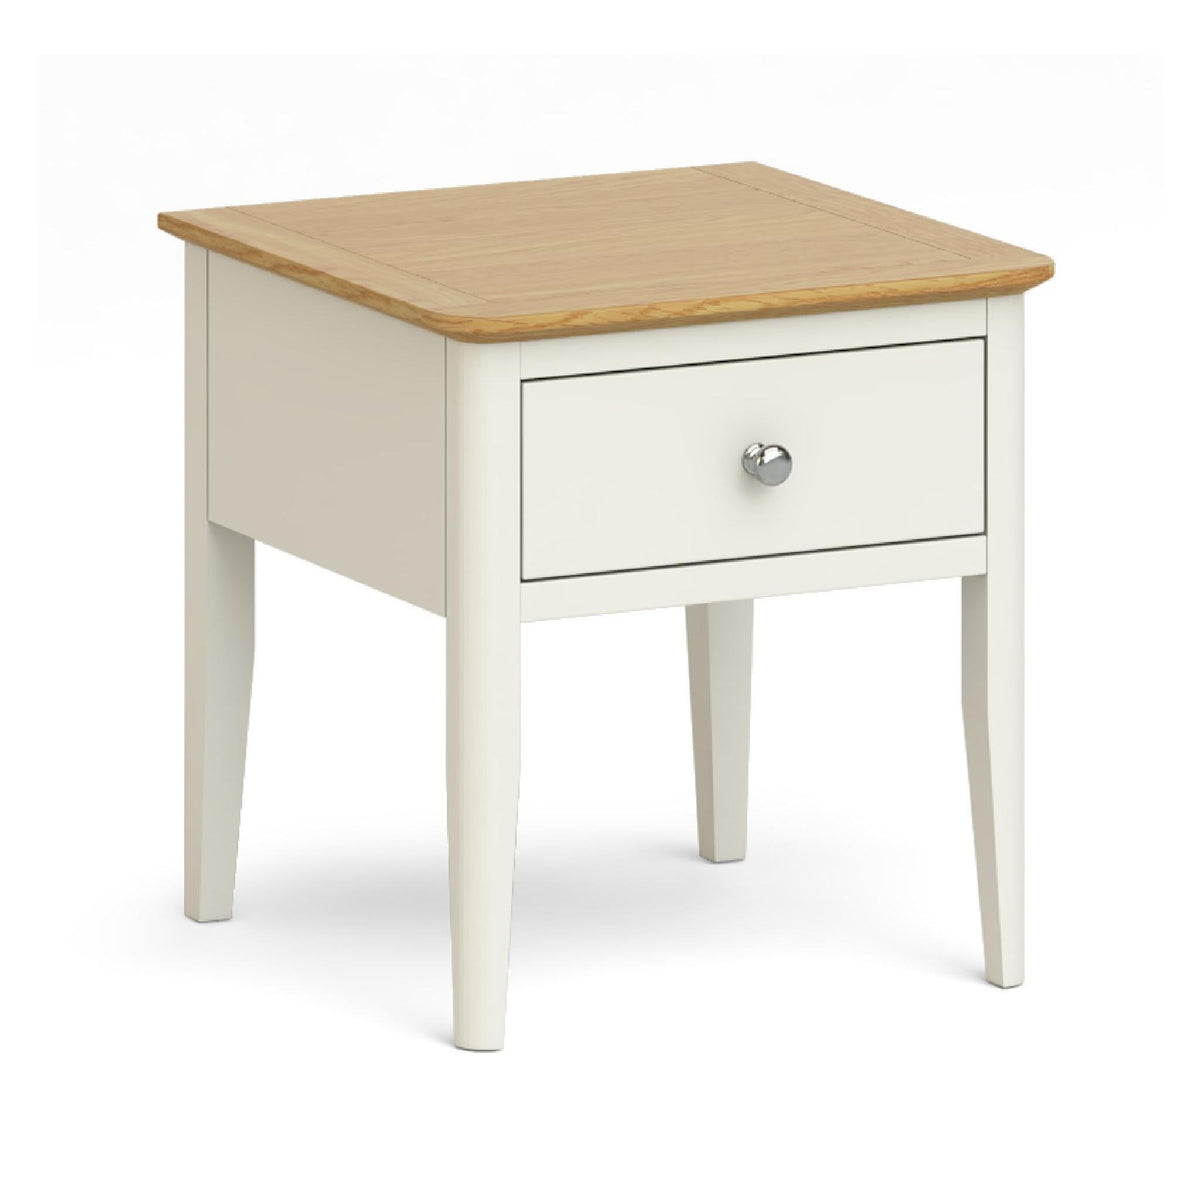 Windsor Cream Lamp Table by Roseland Furniture